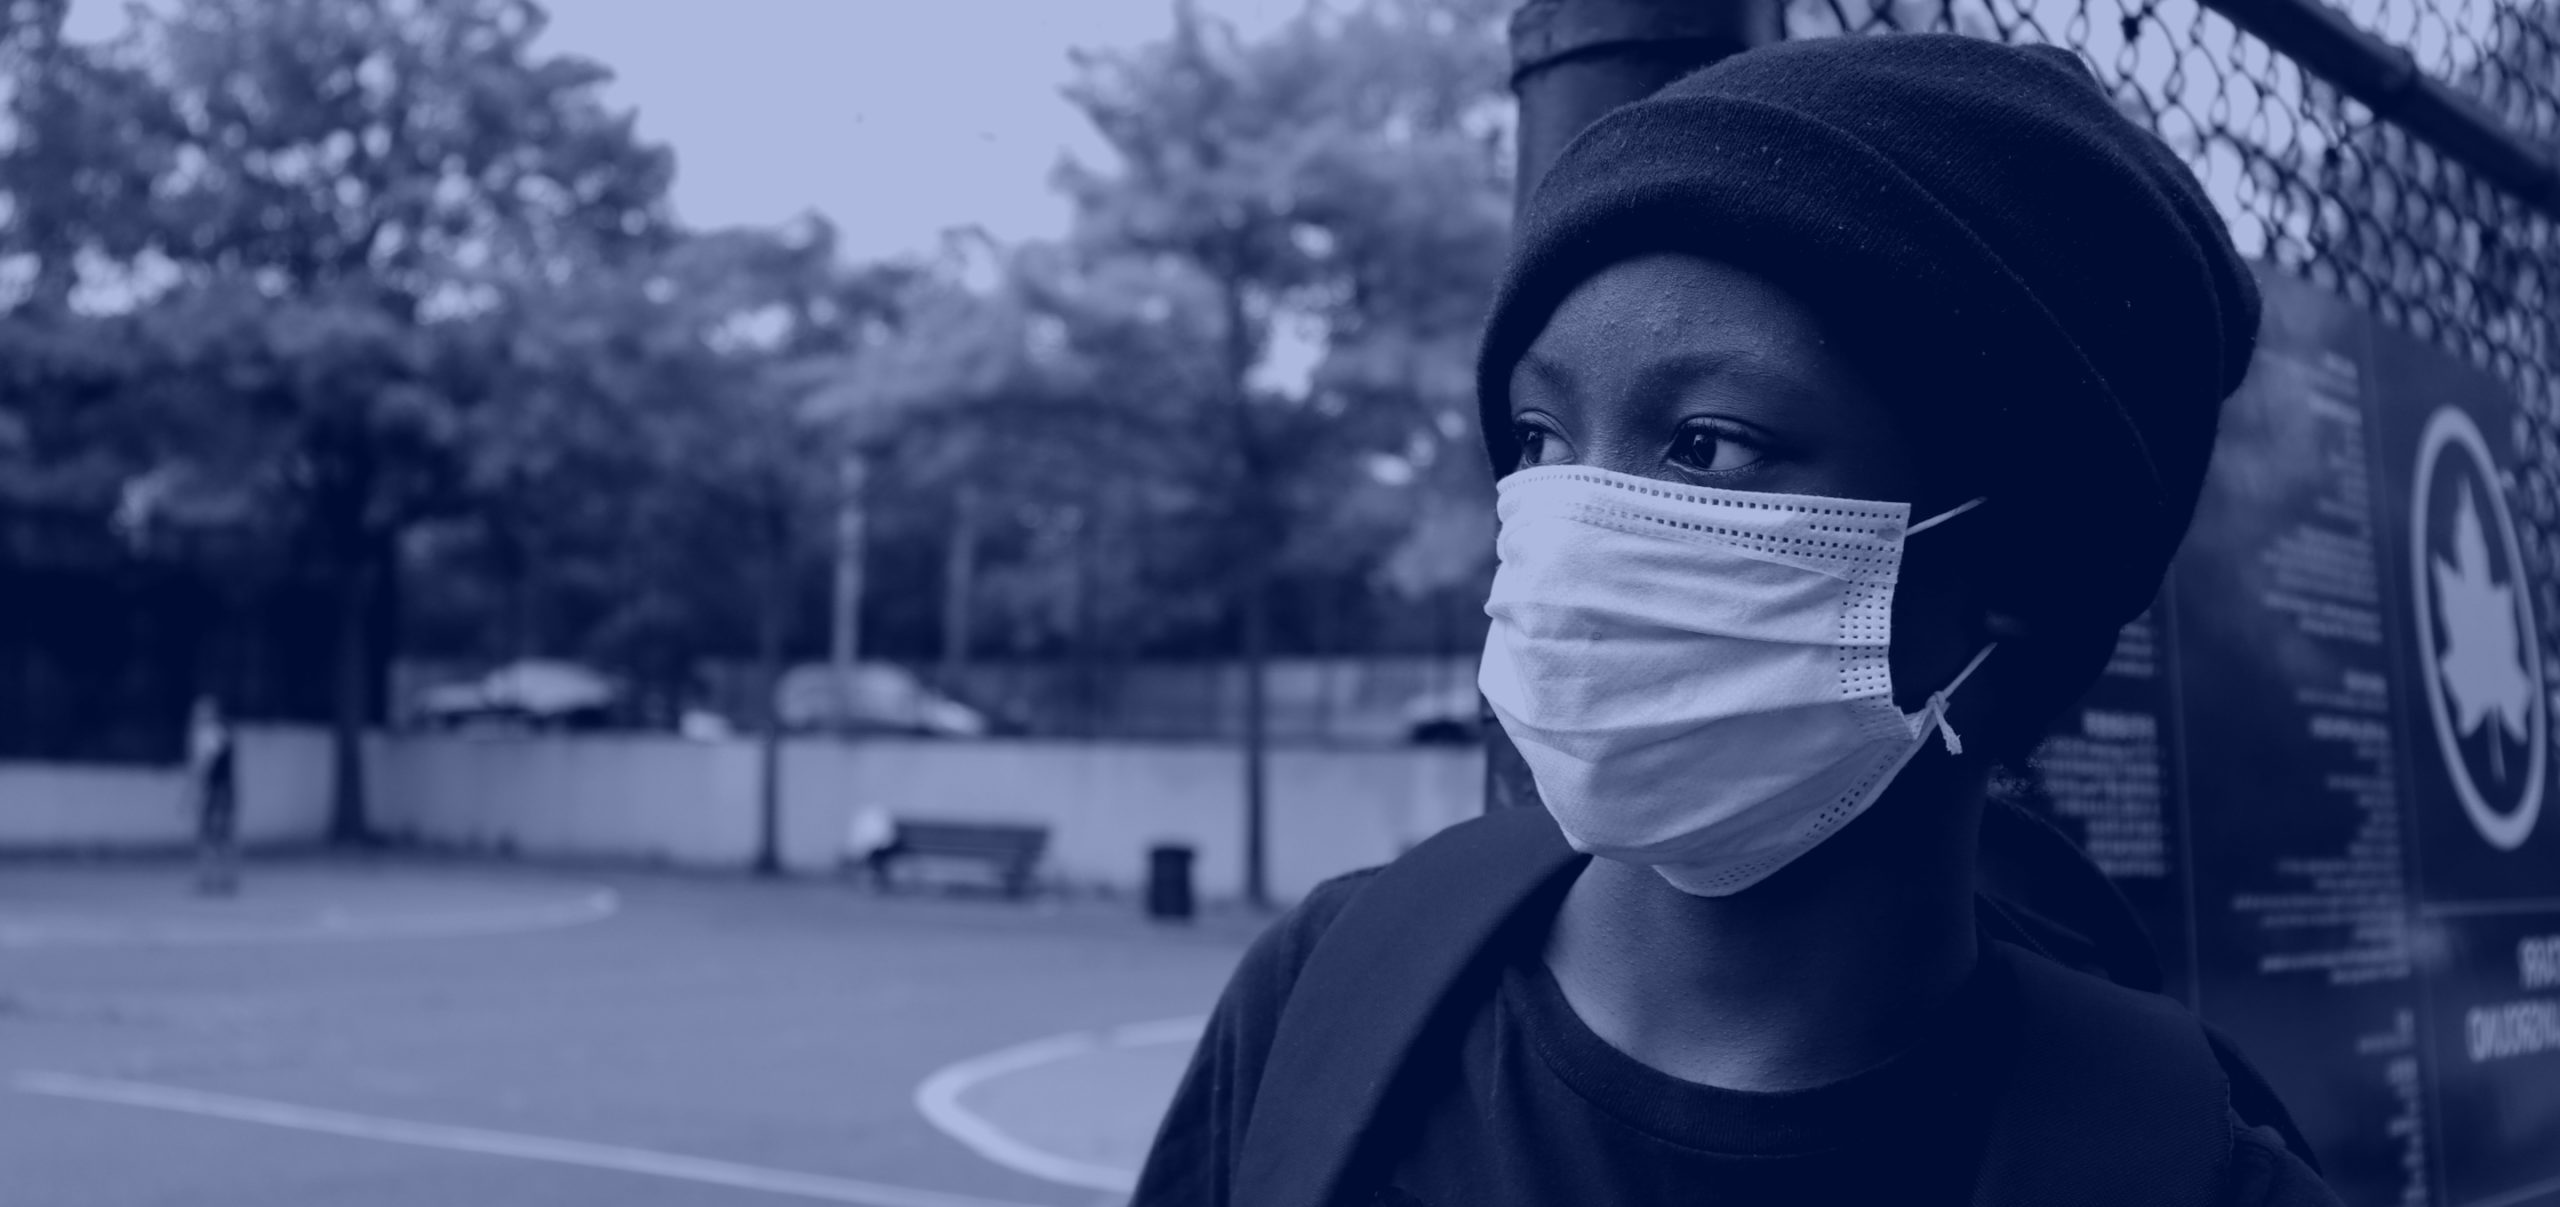 CHICAGO’S YOUTH CITIZEN SCIENTISTS: Launching a new model of teen community healthcare workers